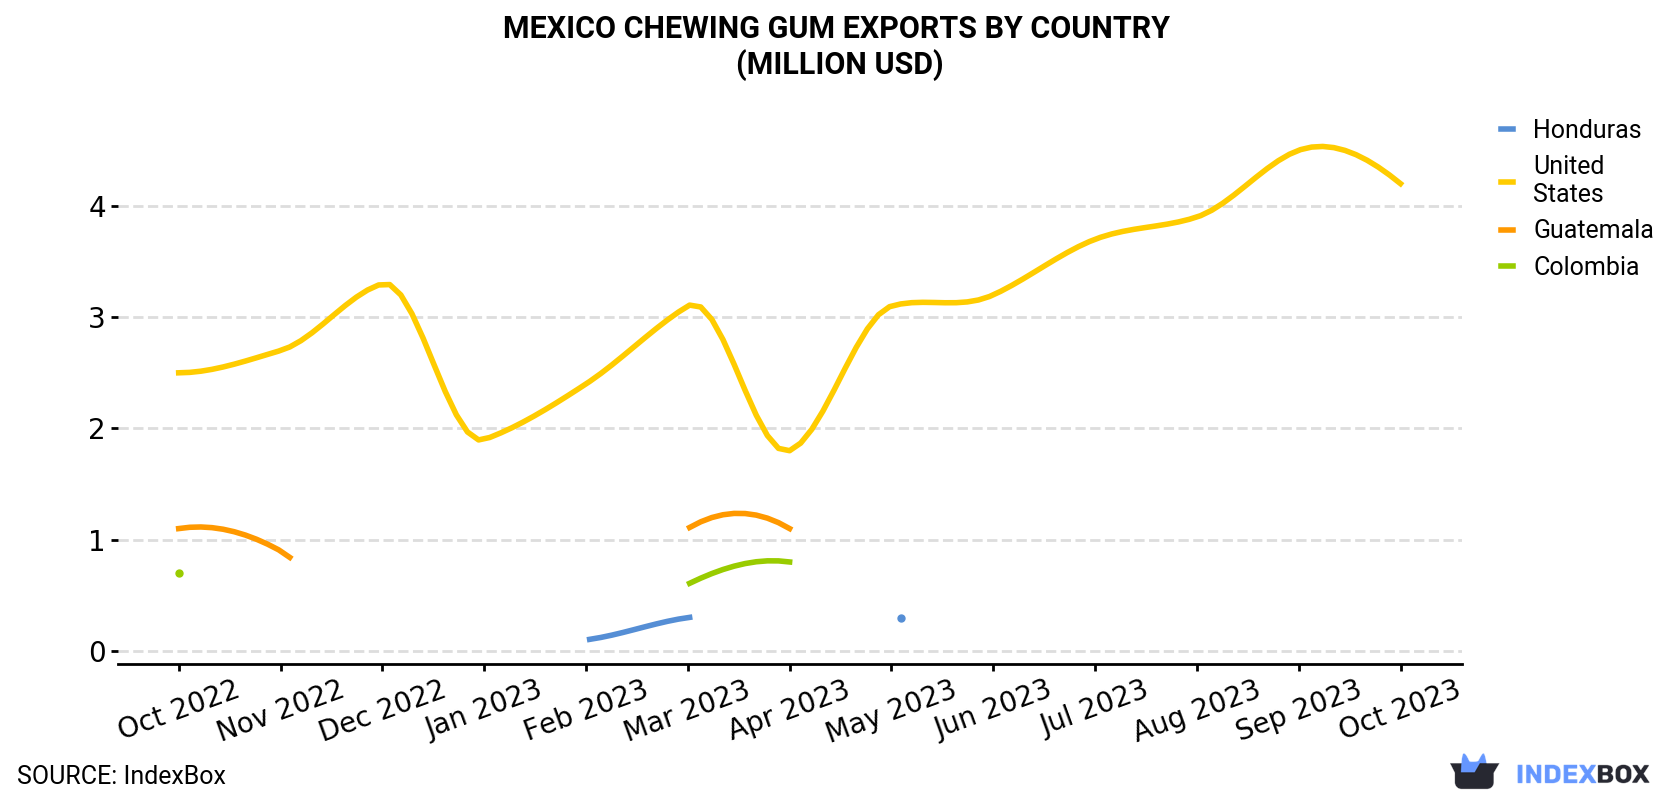 Mexico Chewing Gum Exports By Country (Million USD)